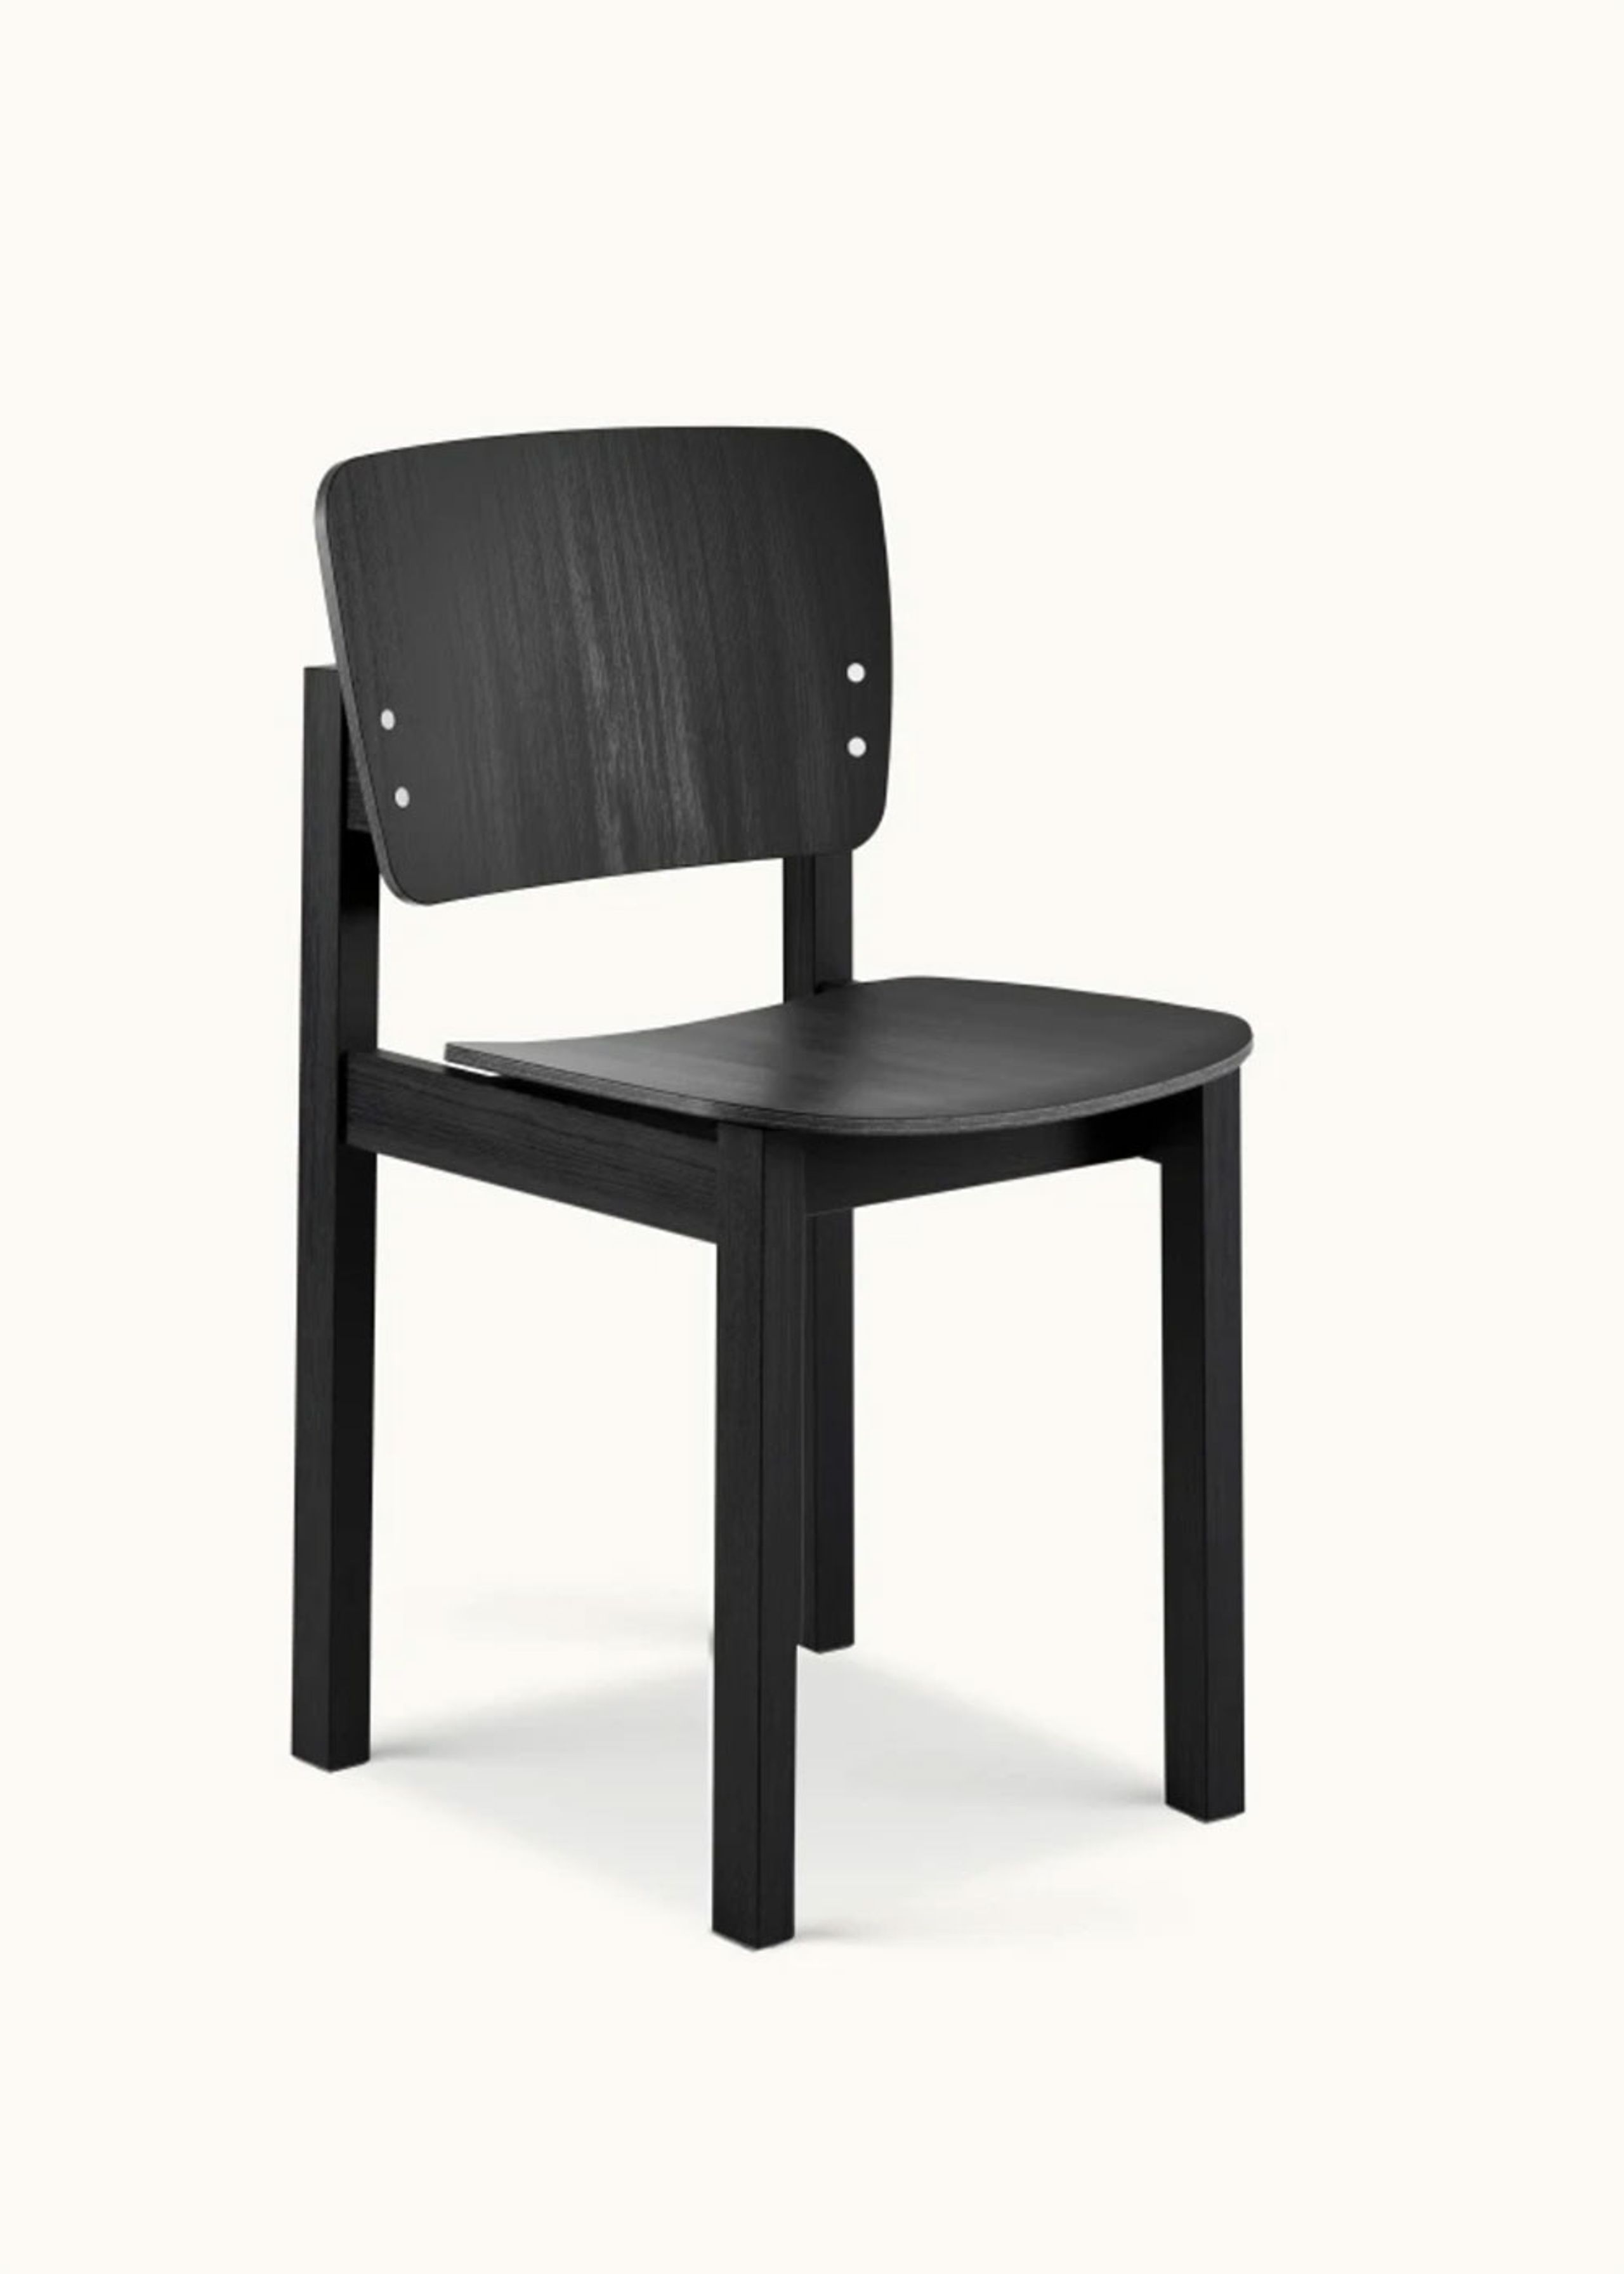 Fogia - Cadeira - Mono Chair / Wood - Seat: Black Stained Oak